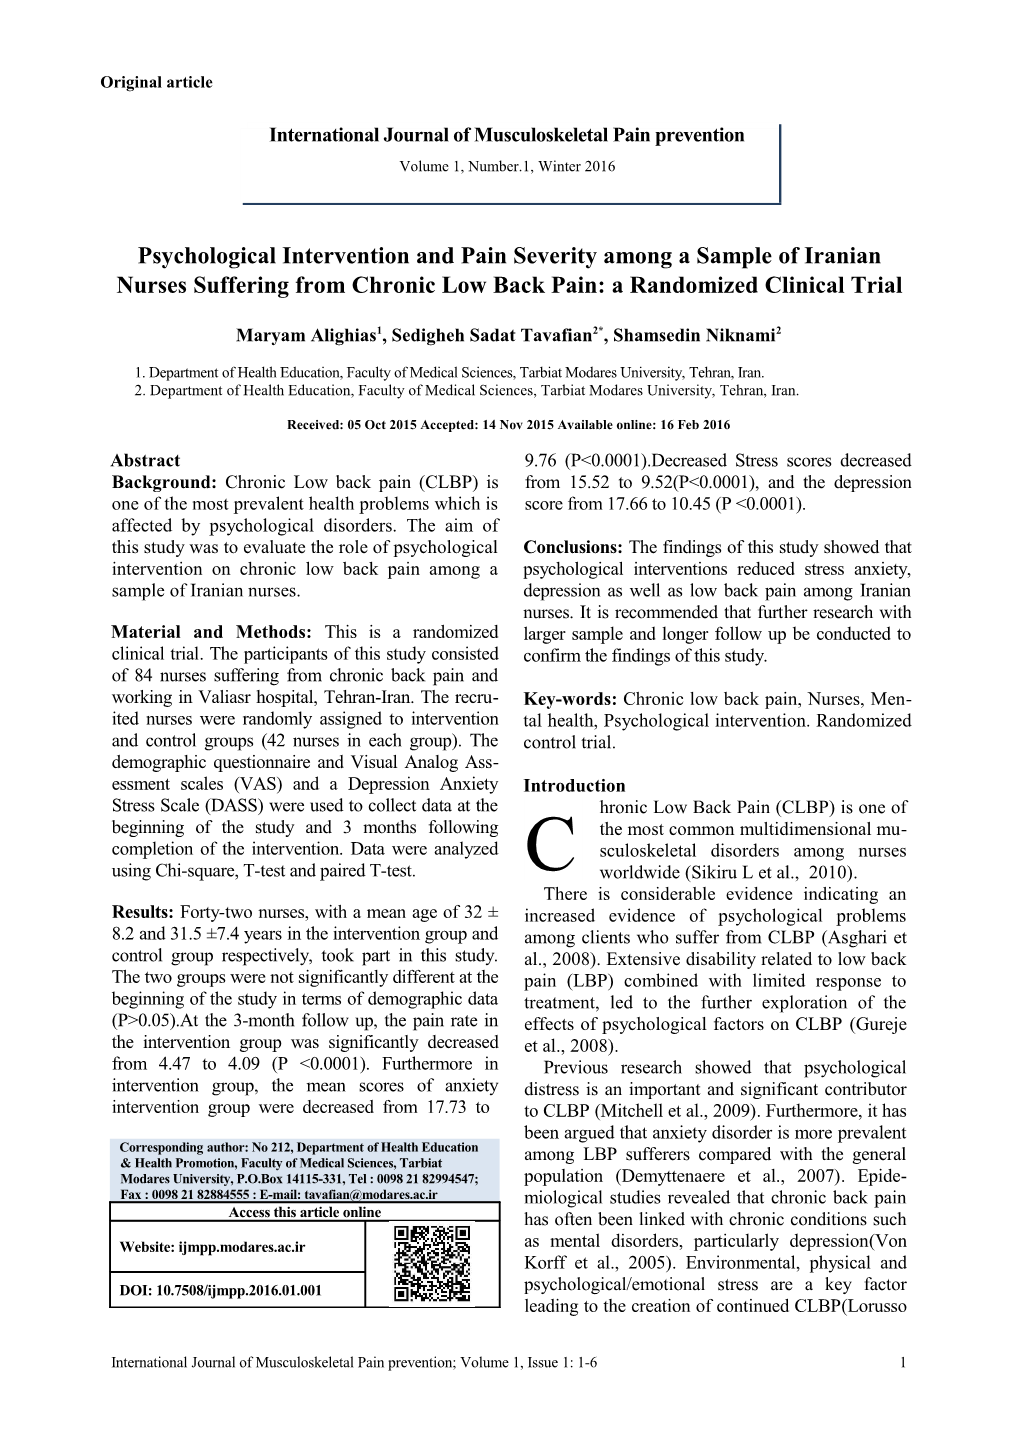 Psychological Intervention and Pain Severity Among a Sample of Iranian K1 Nurses Suffering